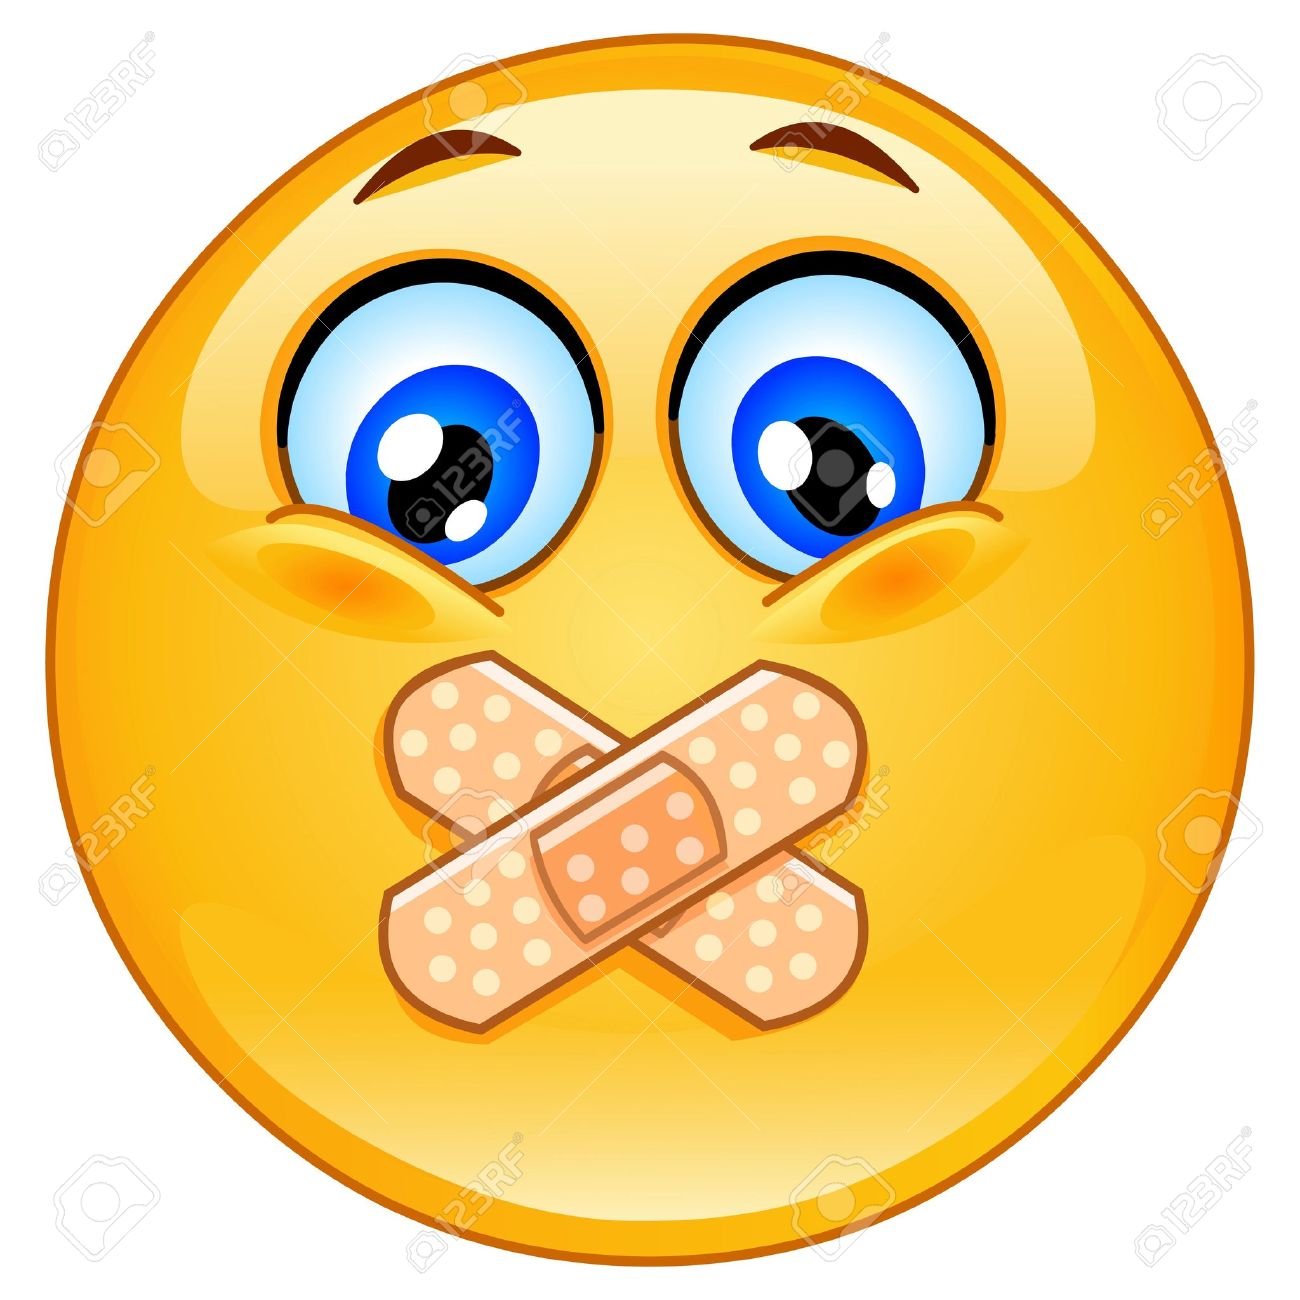 12018921-Emoticon-with-adhesive-bandages-over-his-lips-Stock-Vector-smiley-face-cartoon.jpg